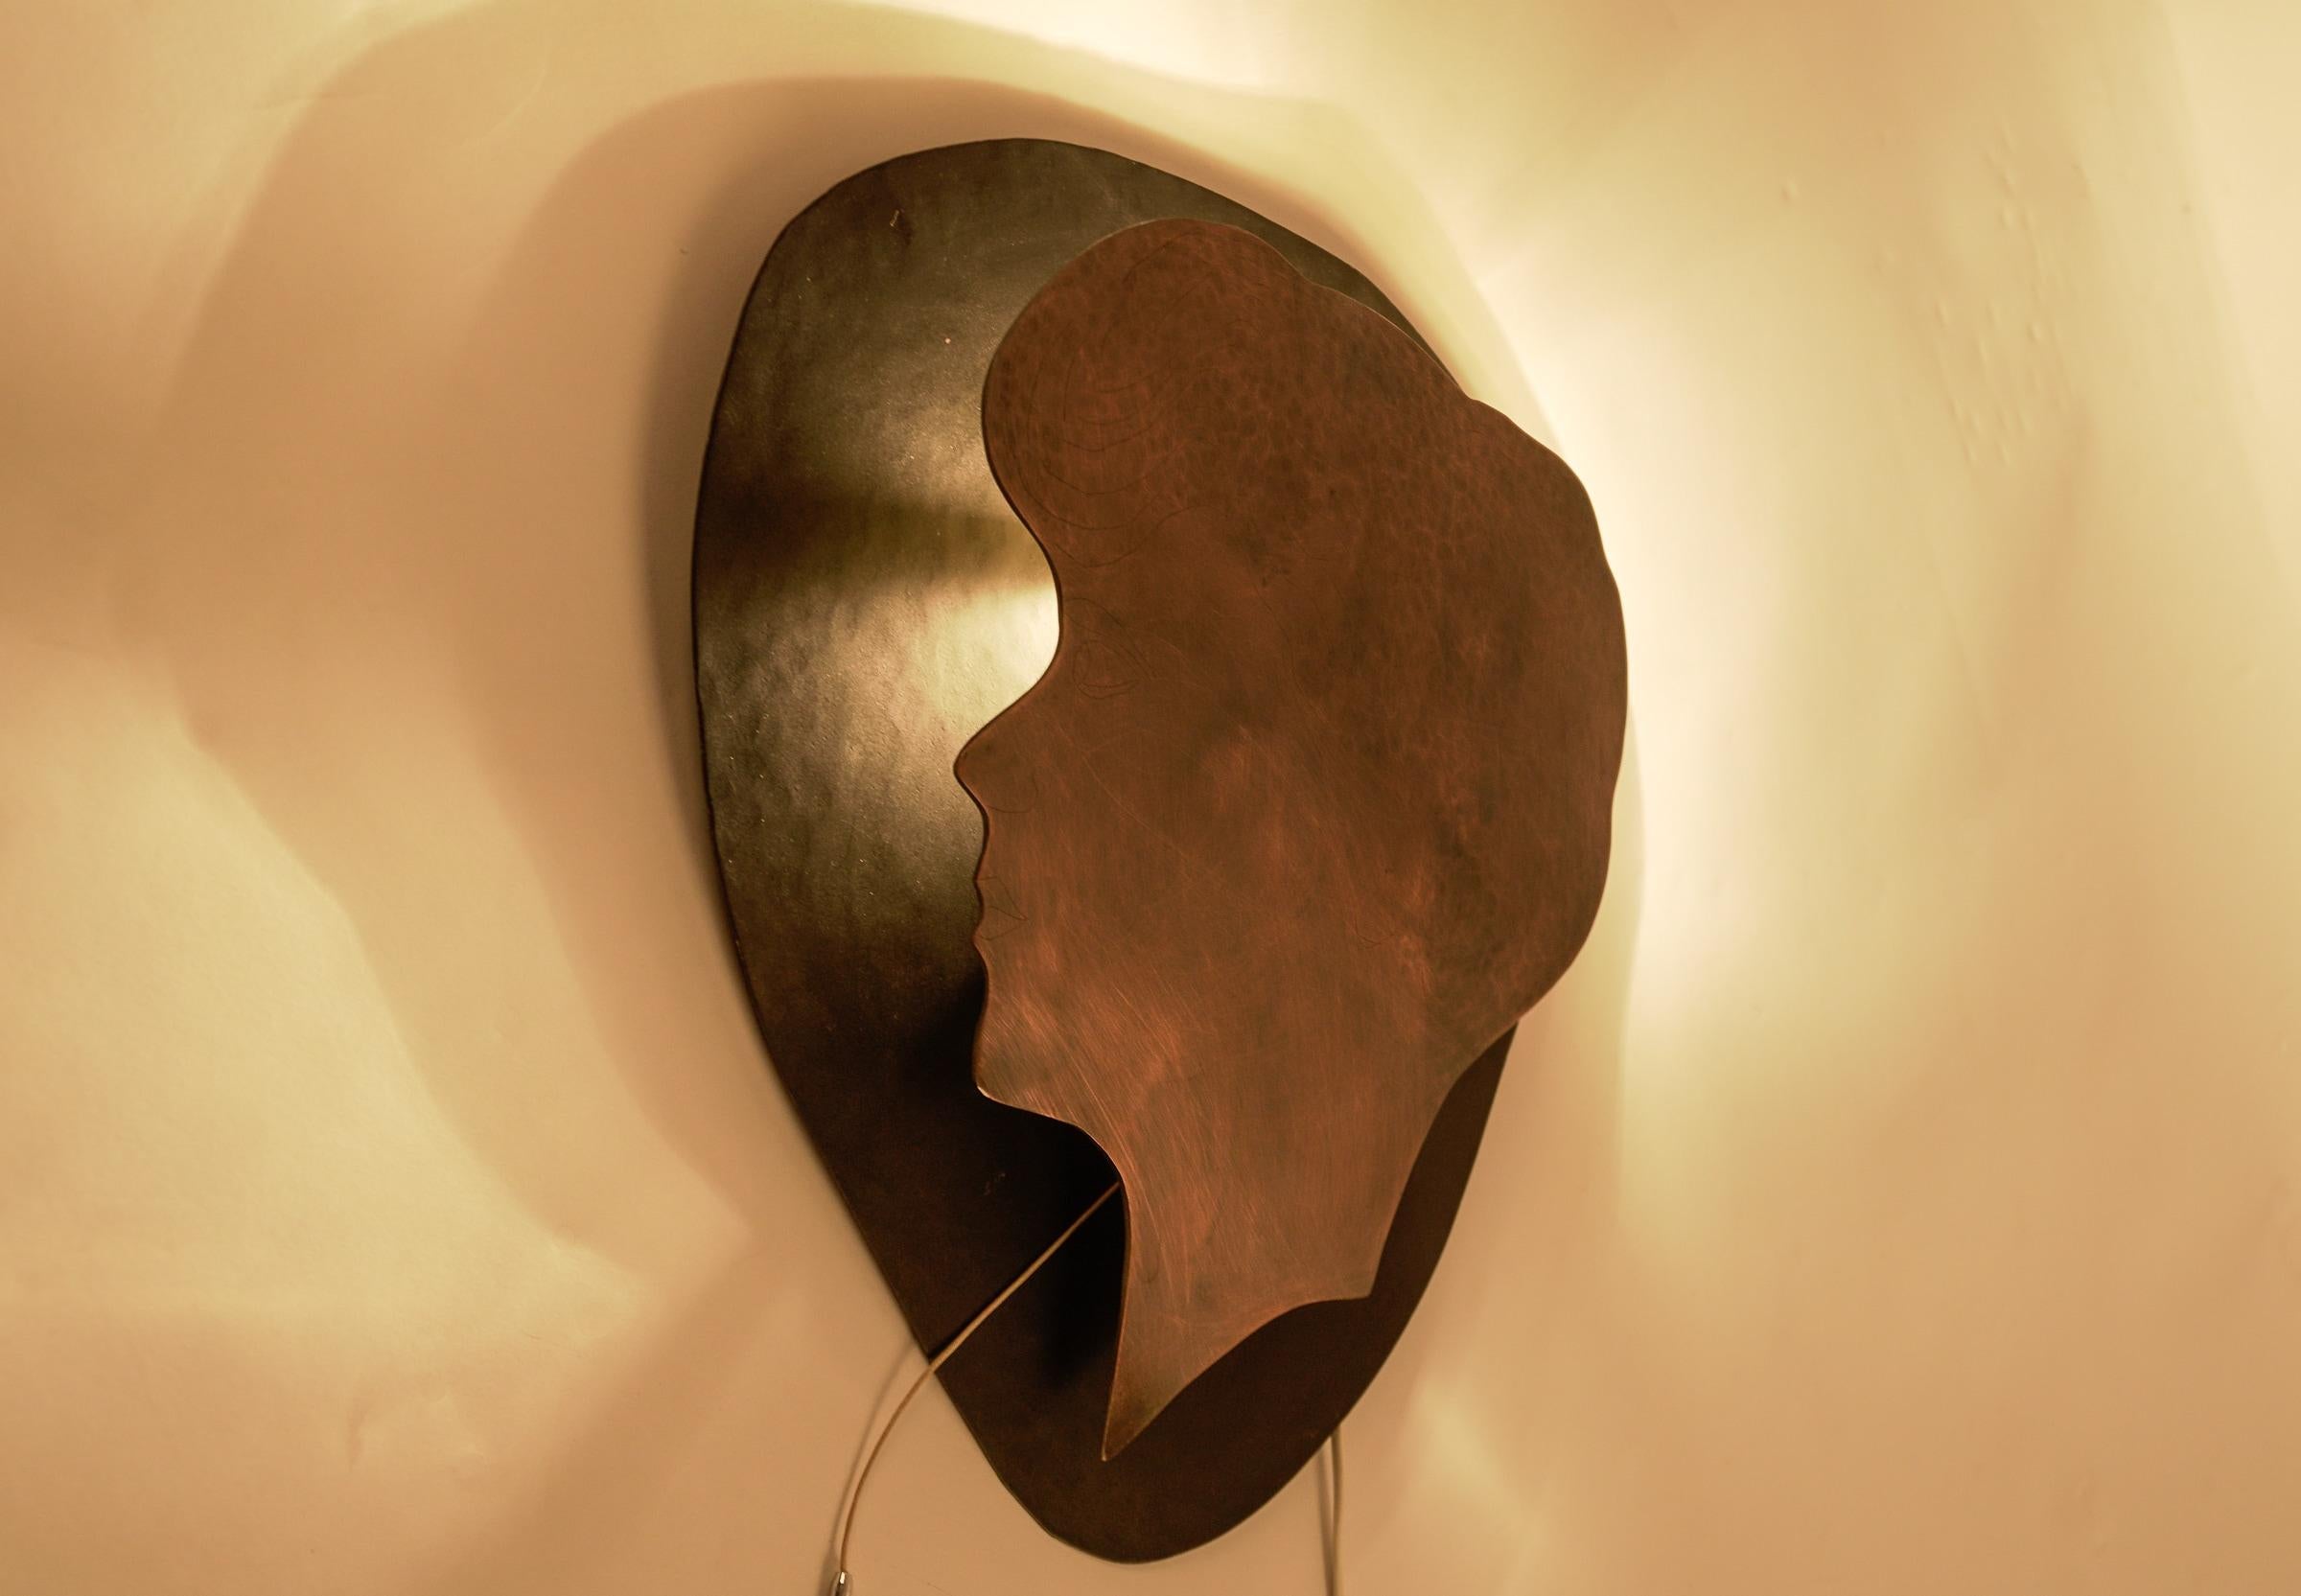 Handmade Woman's Head Wall Lamp in Solid Copper and Metal In Good Condition For Sale In Nürnberg, Bayern